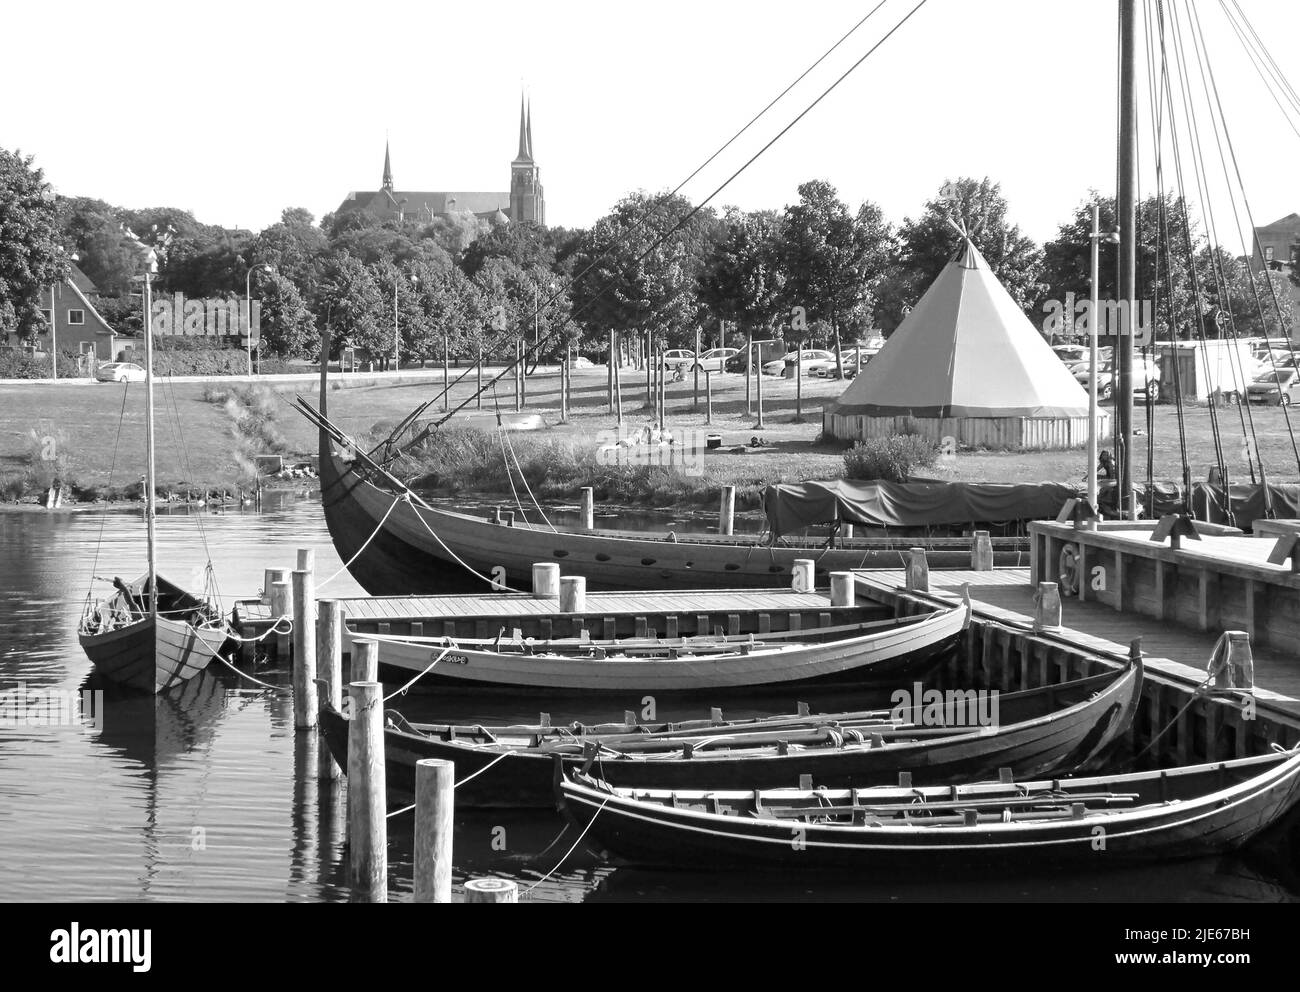 Monochrome Image of Moored Boats at the Viking Ship Museum's Pier with St. Luke Cathedral in the Backdrop, Roskilde, Denmark Stock Photo